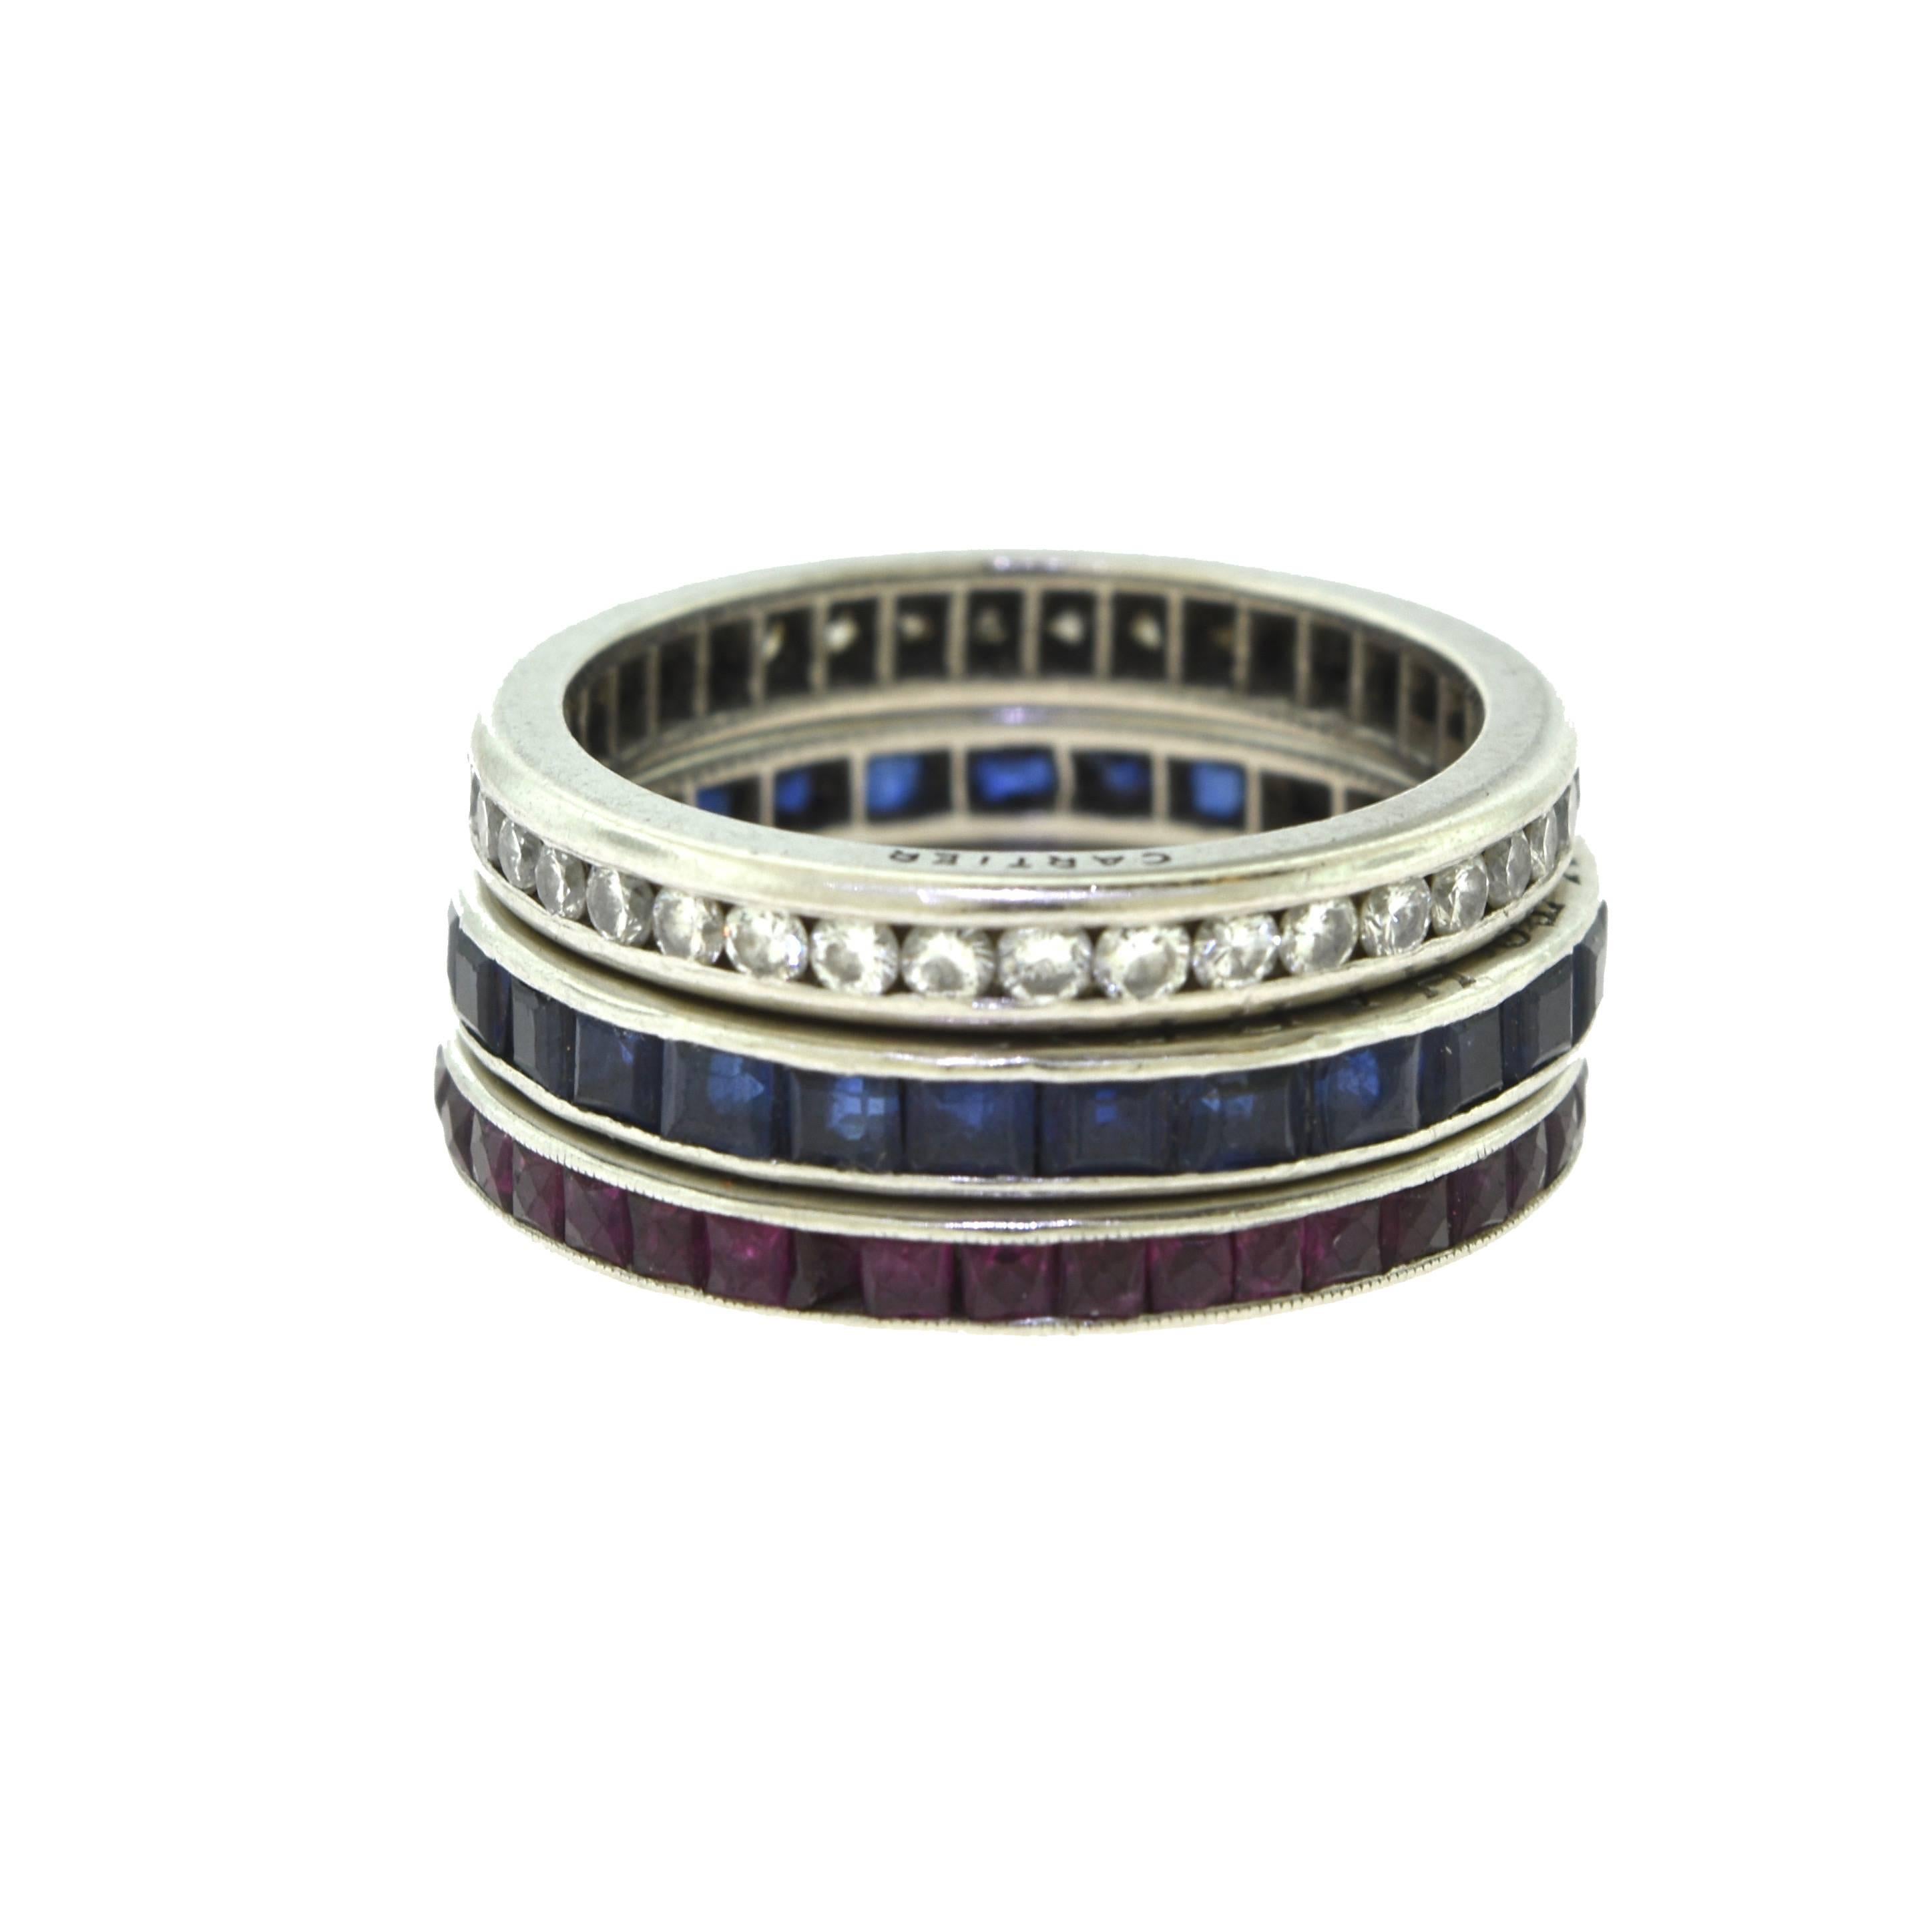 Set of Three Cartier Rings, Very Vintage from the 1950's. 
Each ring features a row of either rubies, sapphires, and diamonds.

Diamond Ring:
3.4 grams
2.74 mm band width.
Ring Size: 6

Ruby Ring:
3.2 grams
2.09 mm band width.
Ring Size: 6

Sapphire